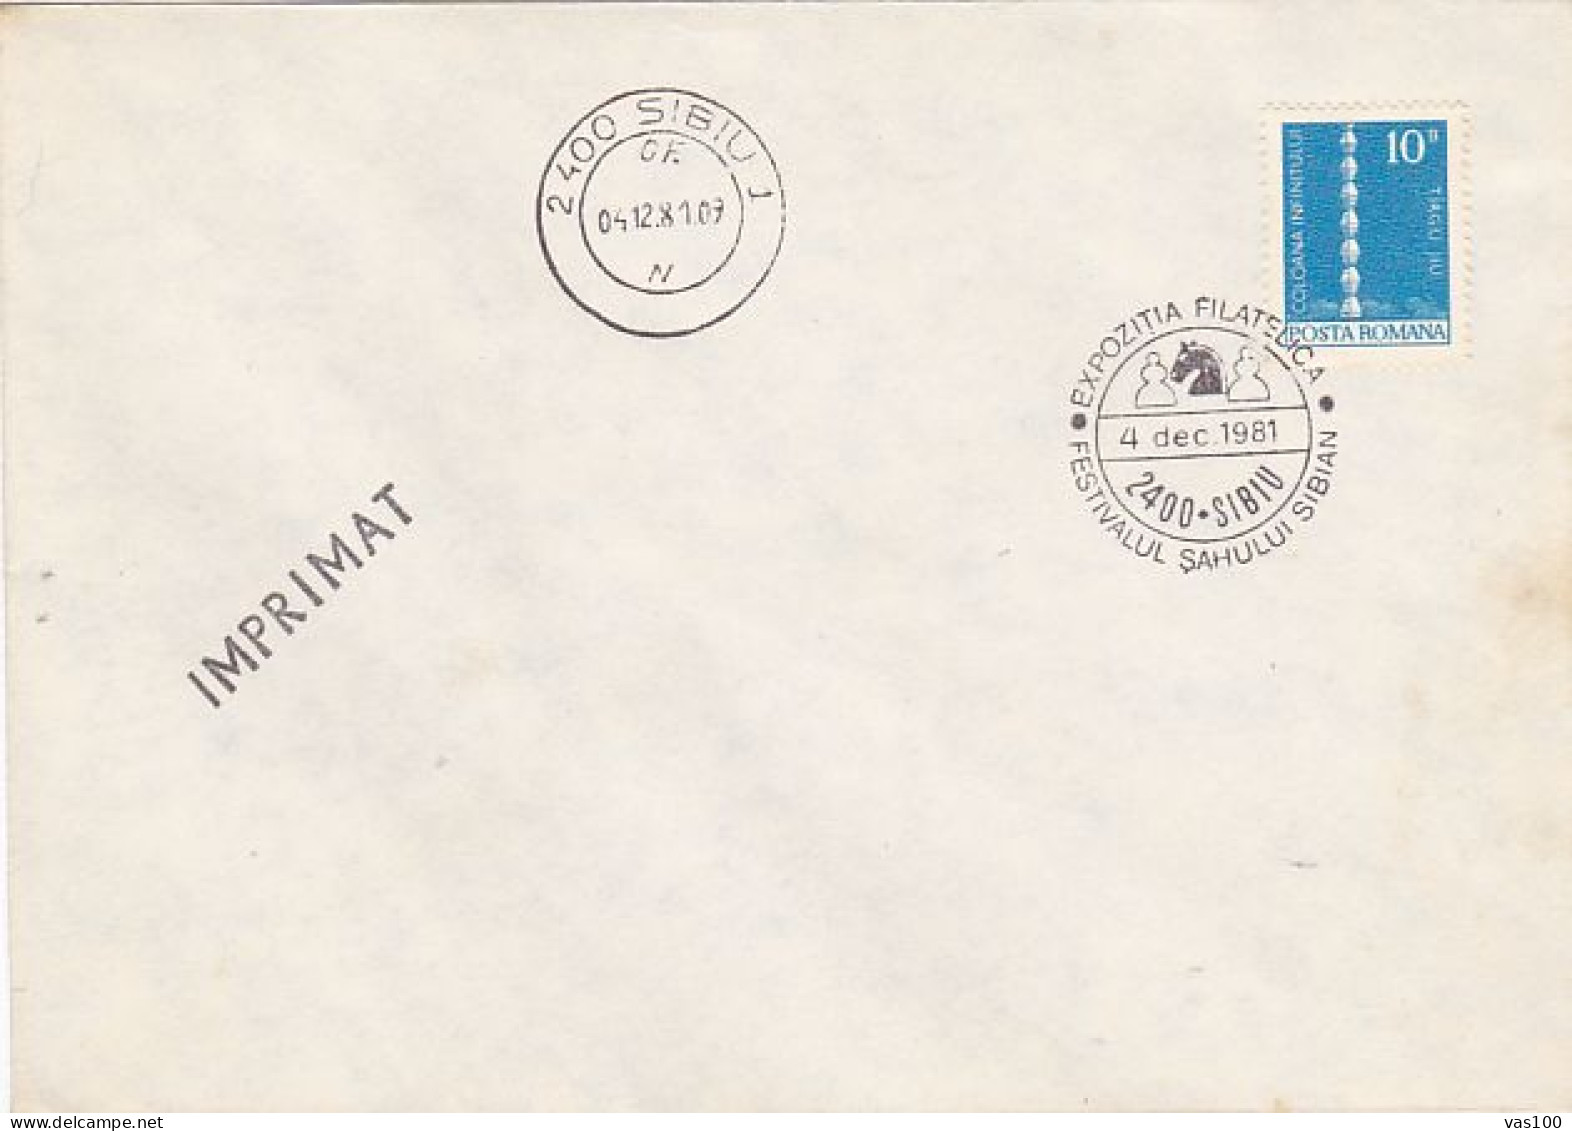 GAMES, CHESS, SIBIU CHESS FESTIVAL SPECIAL POSTMARK ON COVER, 1981, ROMANIA - Chess